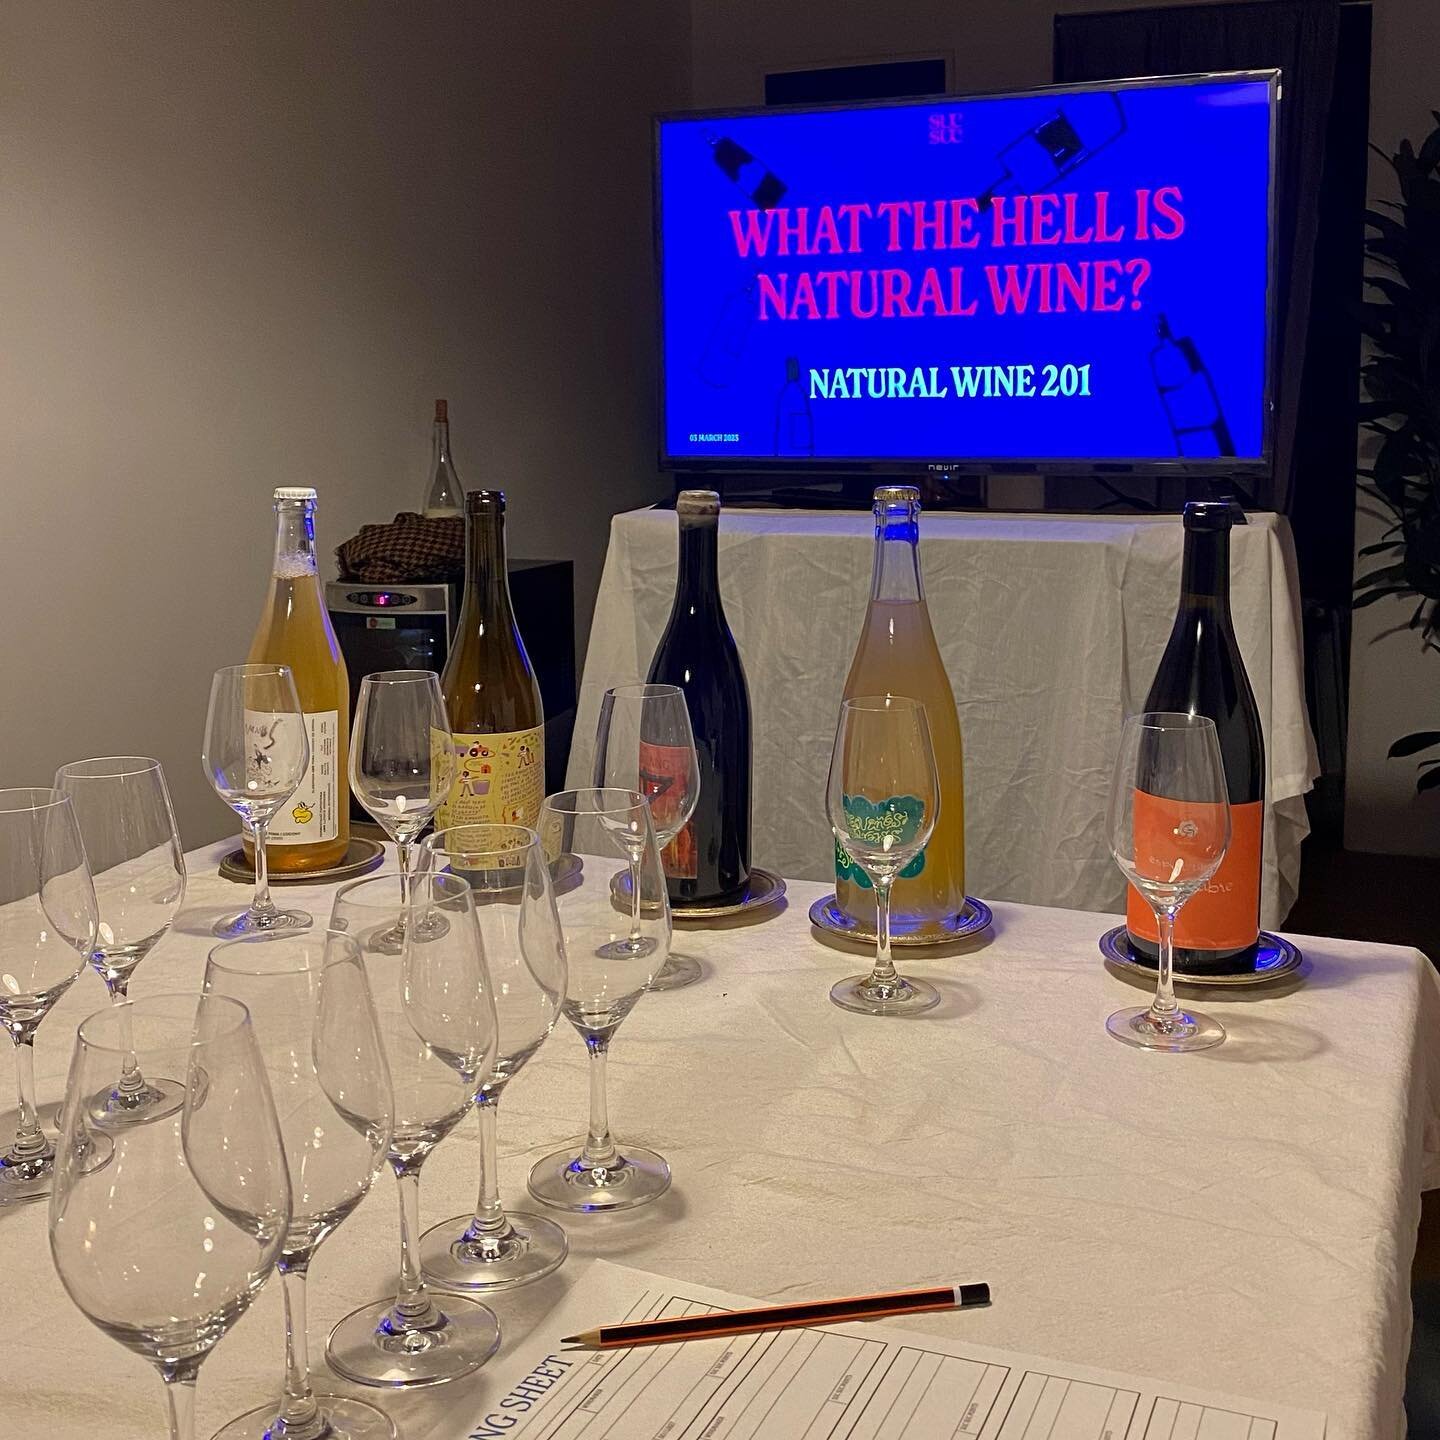 🙋🏻&zwj;♂️&ldquo;What the hell is natural wine?&rdquo; I&rsquo;ve dipped into natural wines occasionally over the years, but I must admit to being a bit vague about (a) what defines them, and (b) if they&rsquo;re for me. I suppose I&rsquo;d consider